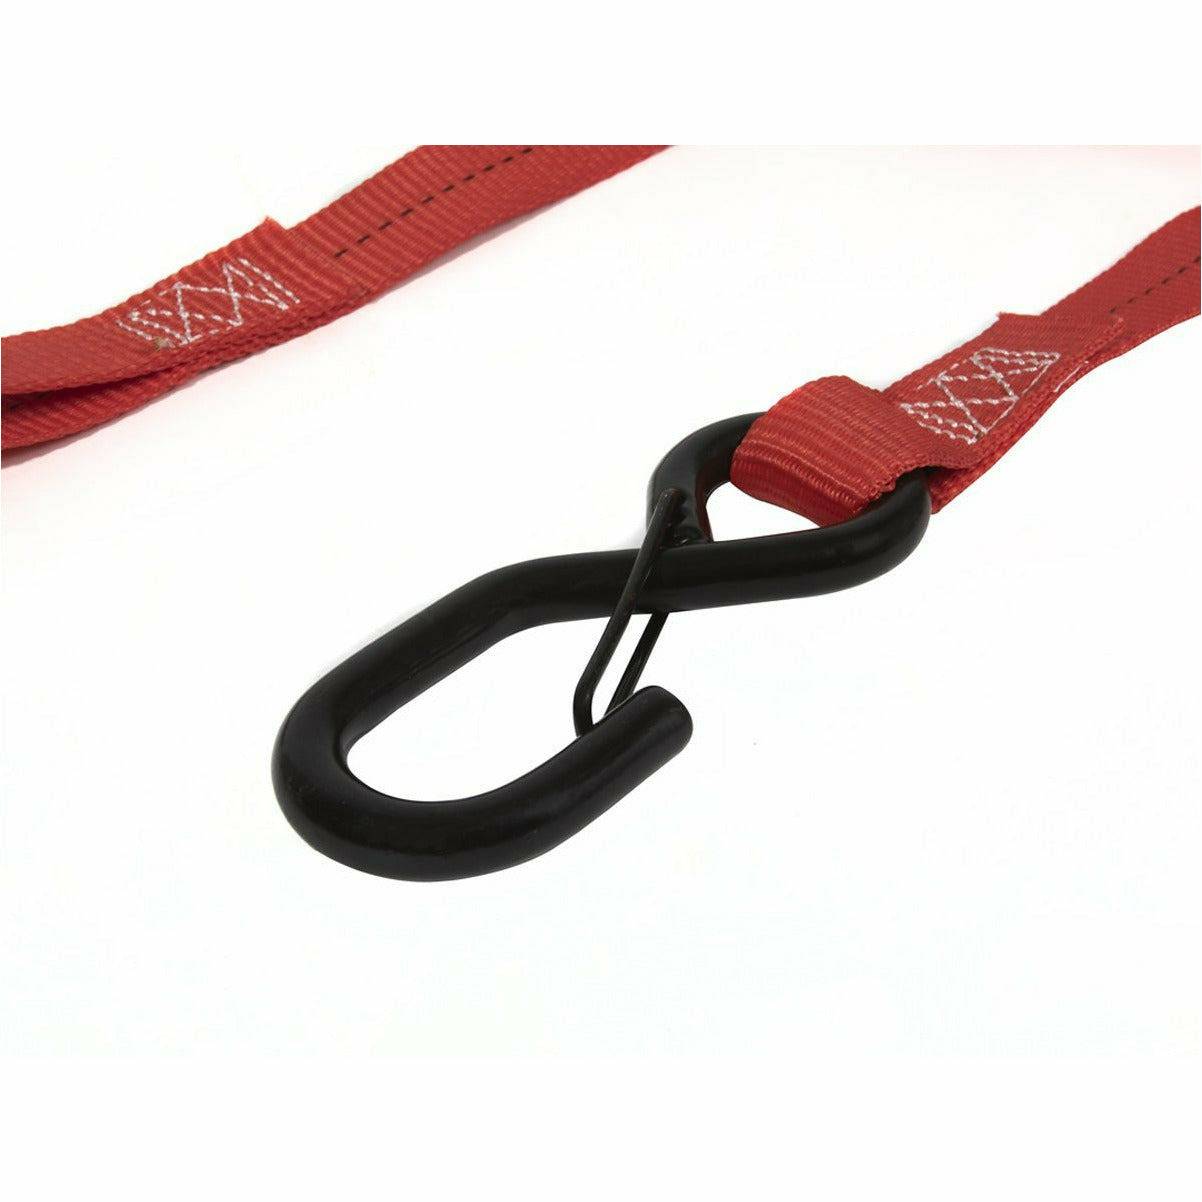 1"x15' Ratchet Tie Down with Snap S Hooks (2 Pack)